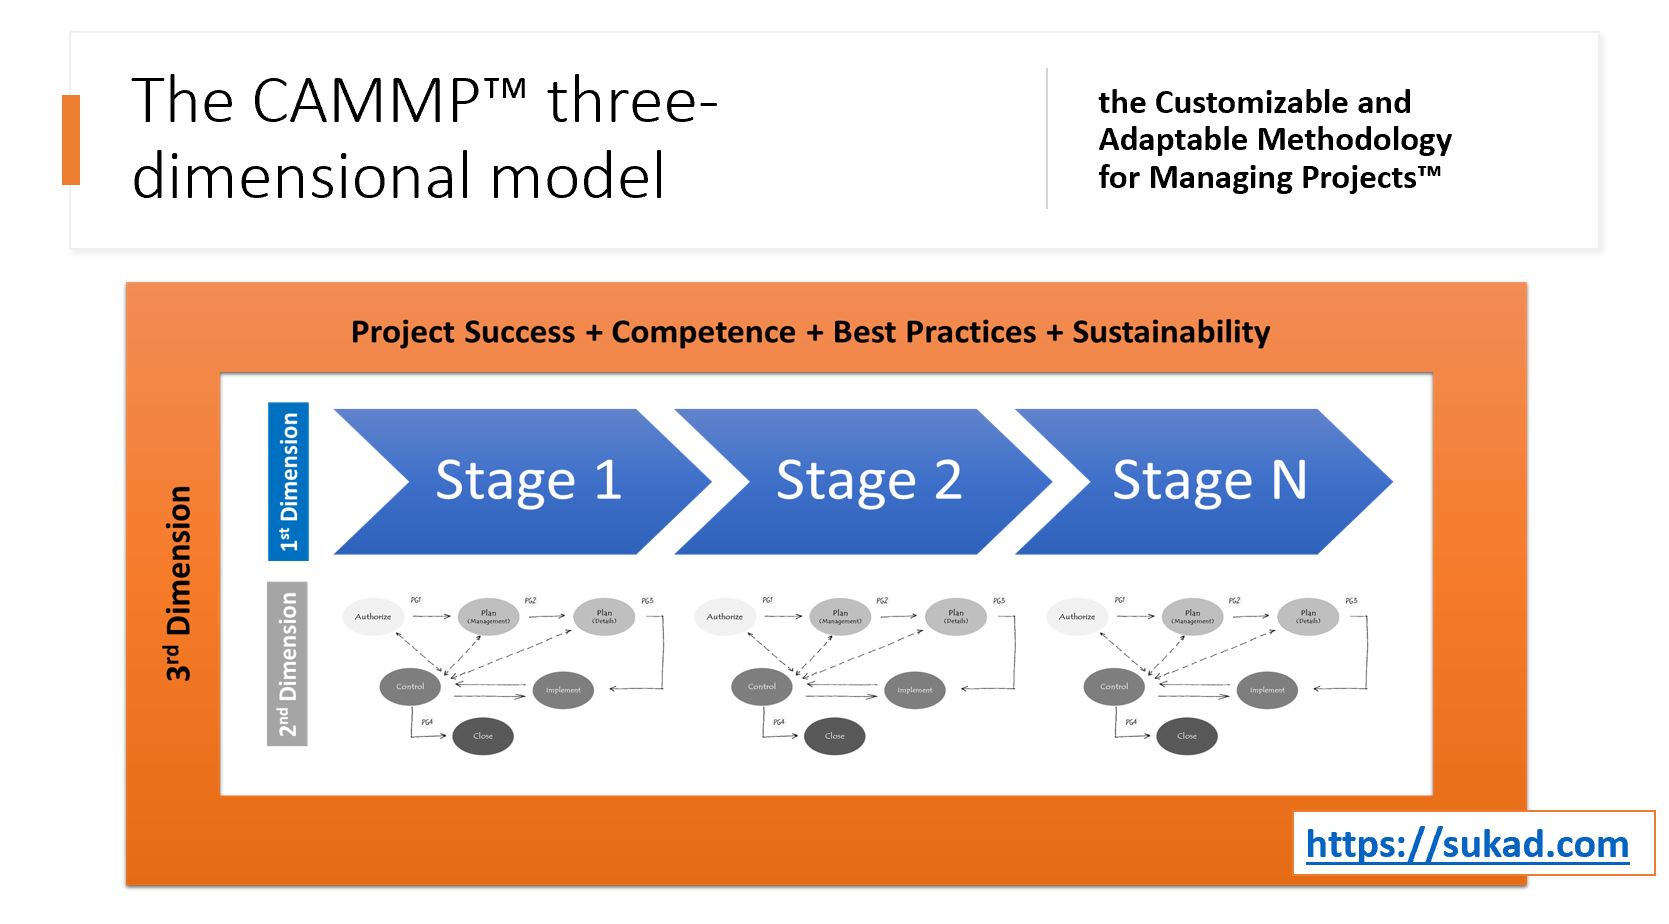 Is the CAMMP Model a modified version of the PMBOK Guide?